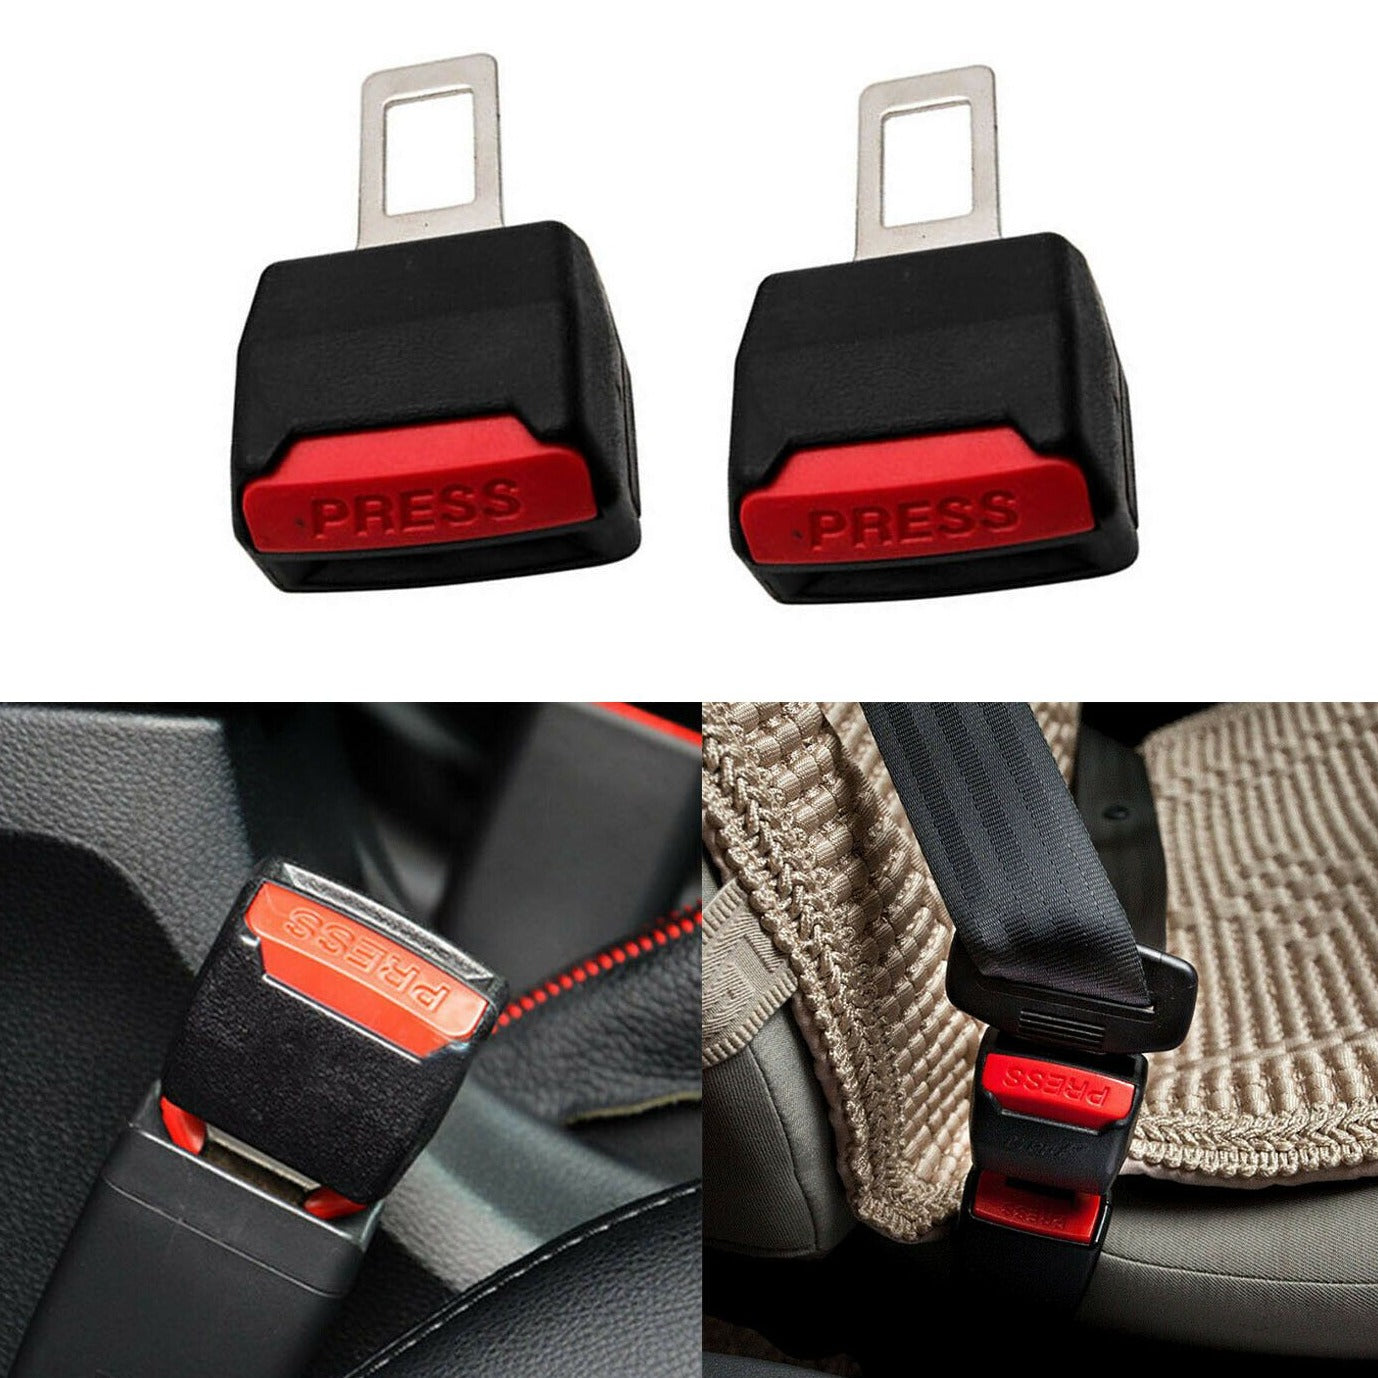 2 Piece Car Safety Universal Seat Belt Buckle Extender Clip Alarm Stopper freeshipping - Dealz4all Store